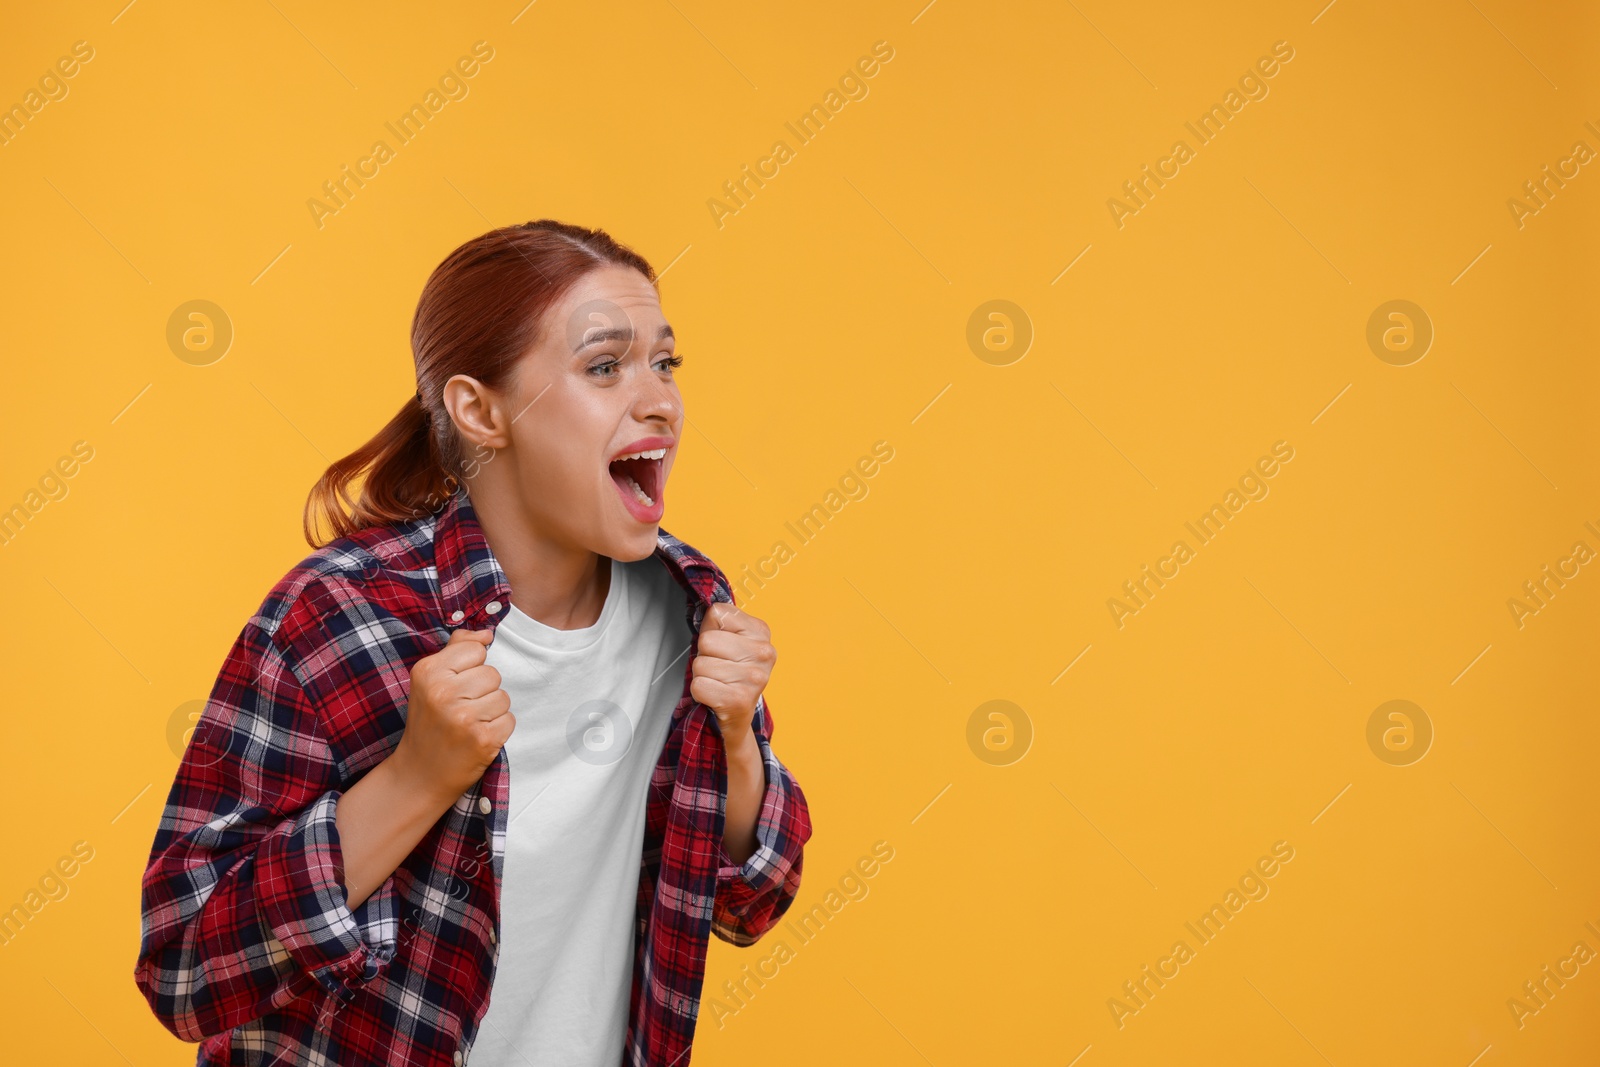 Photo of Emotional fan on yellow background, space for text